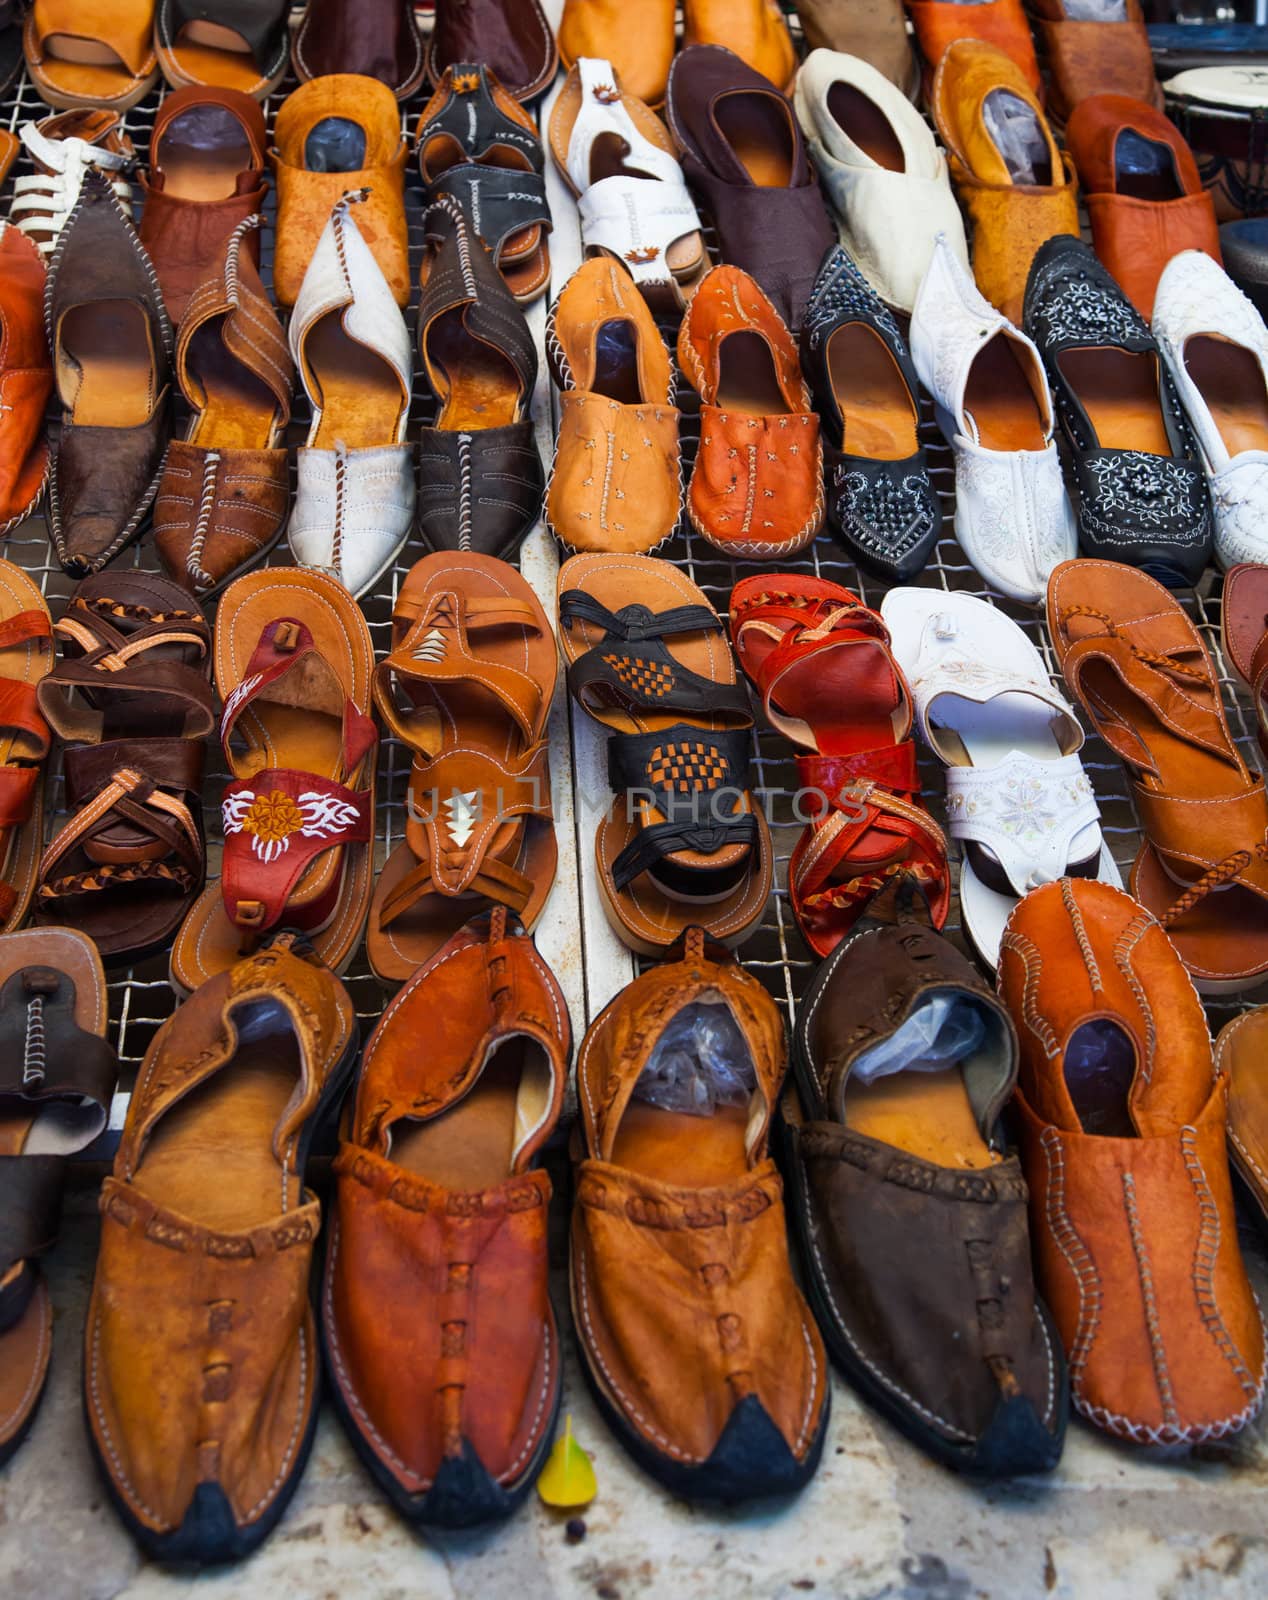 Shoes for sale on a tunisian street  by fambros